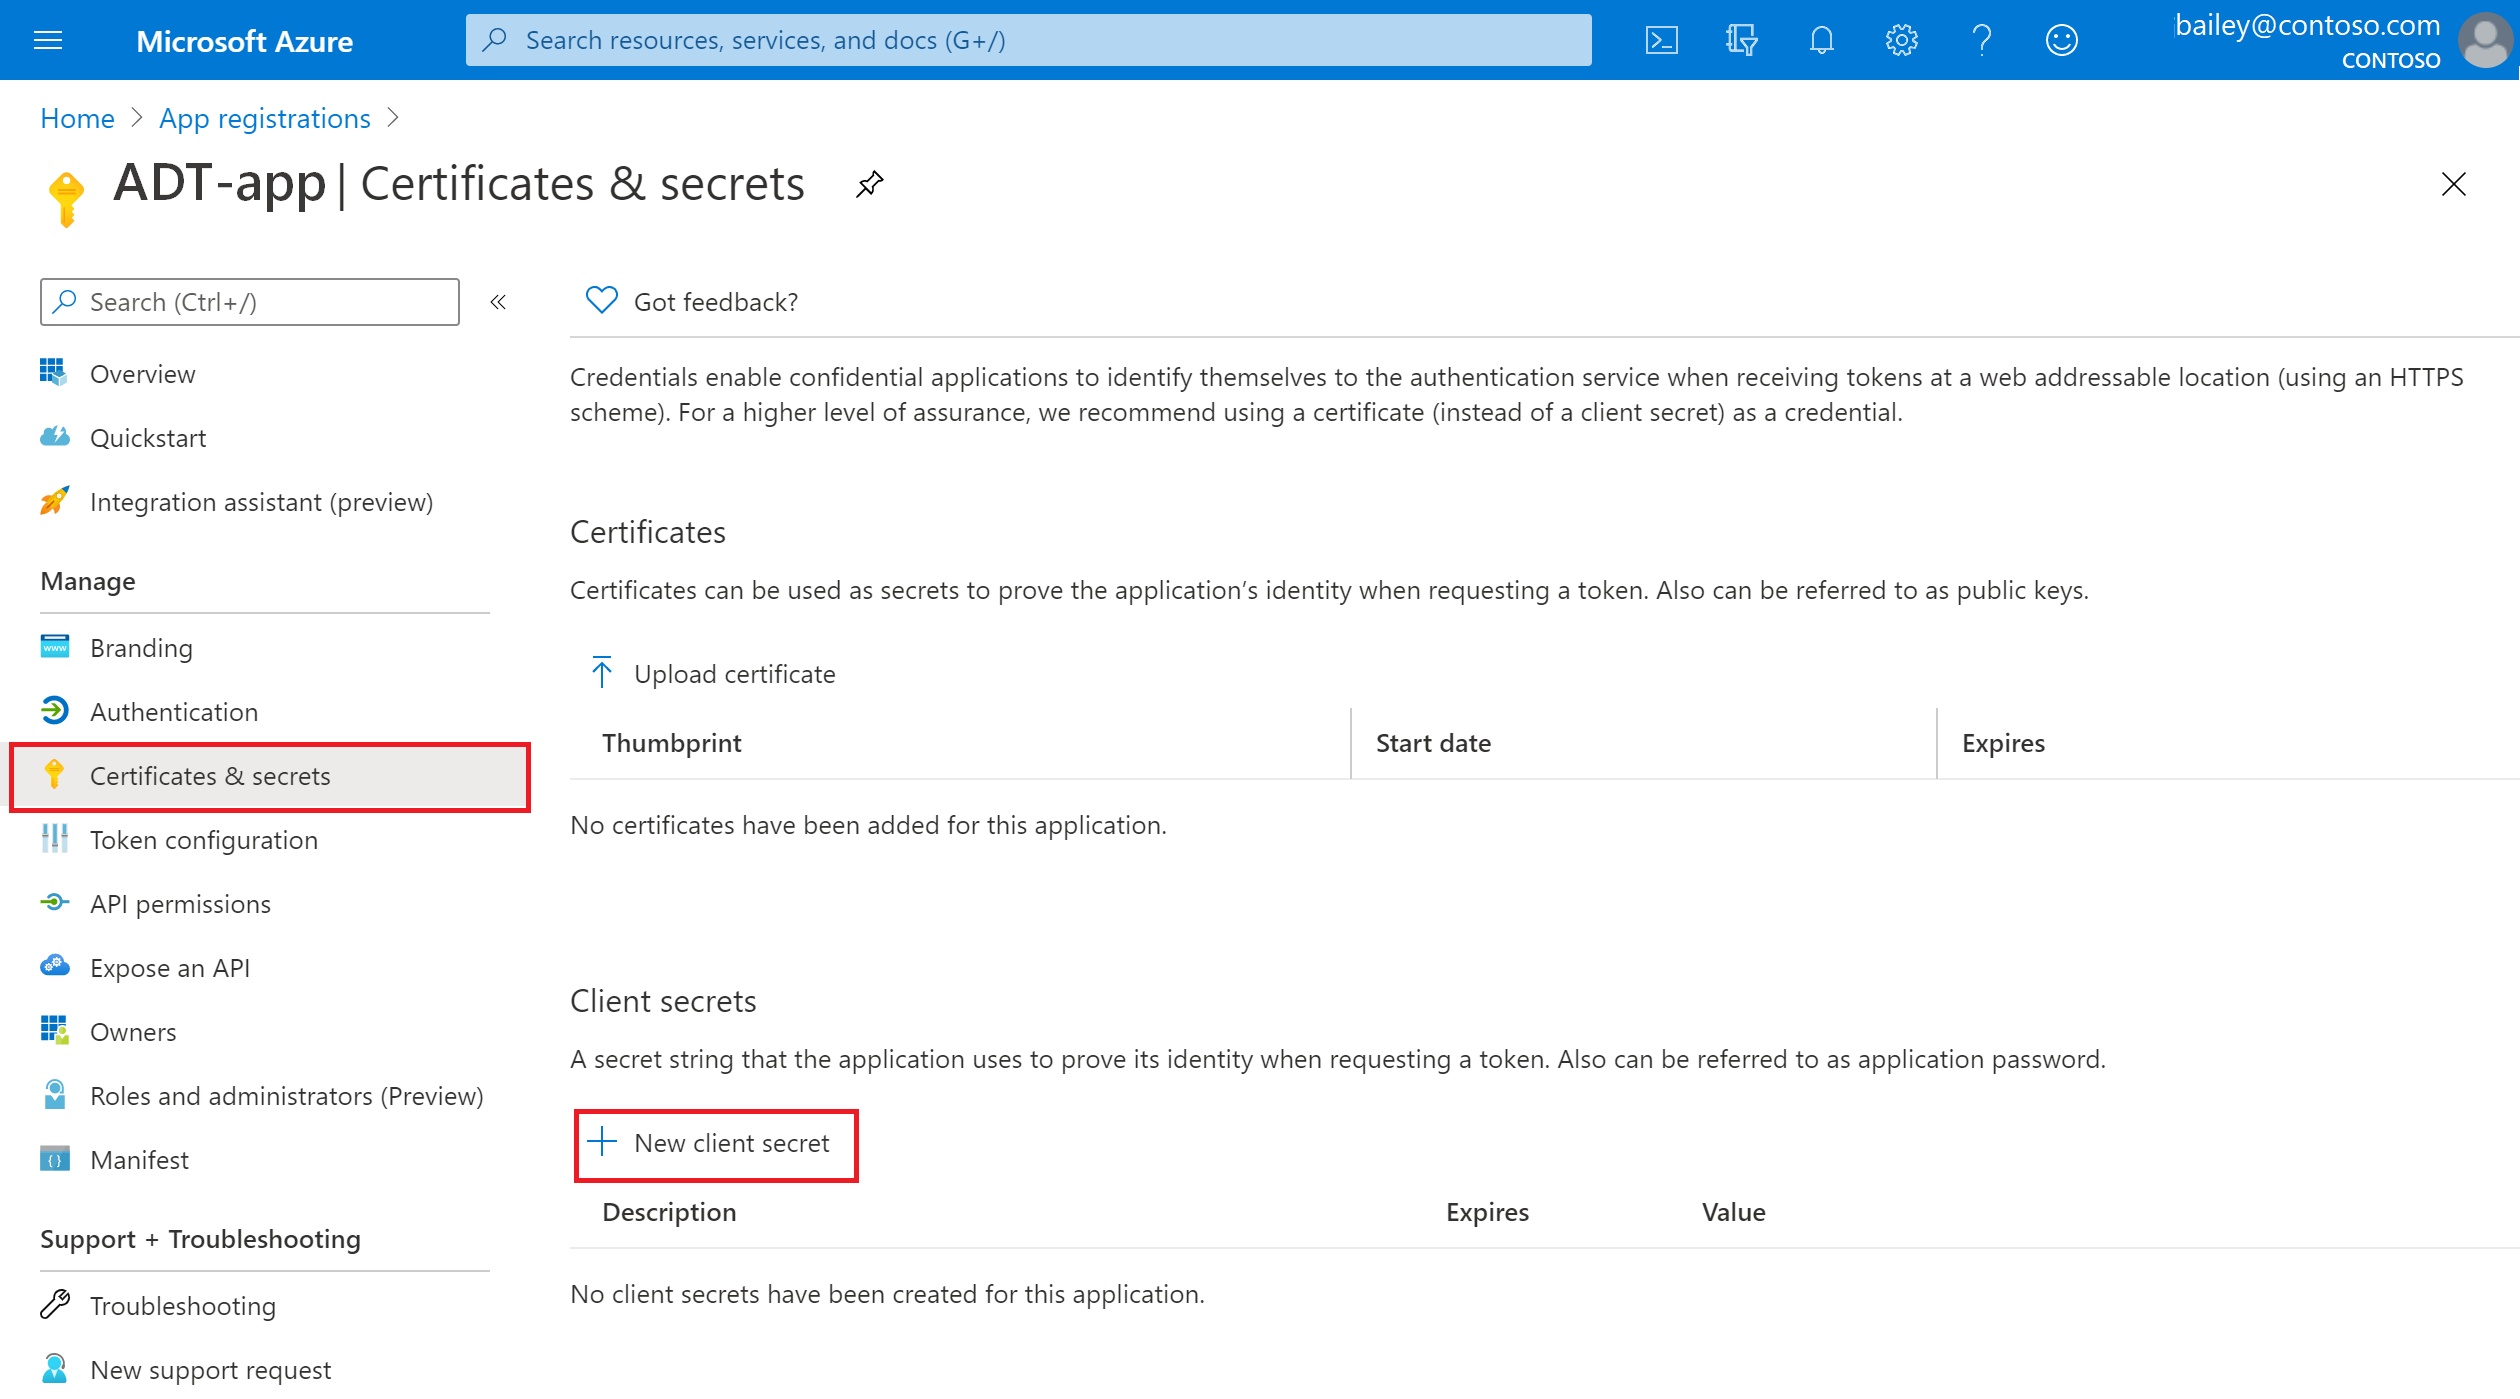 Screenshot of the Azure portal showing a Microsoft Entra app registration and a highlight around 'New client secret'.